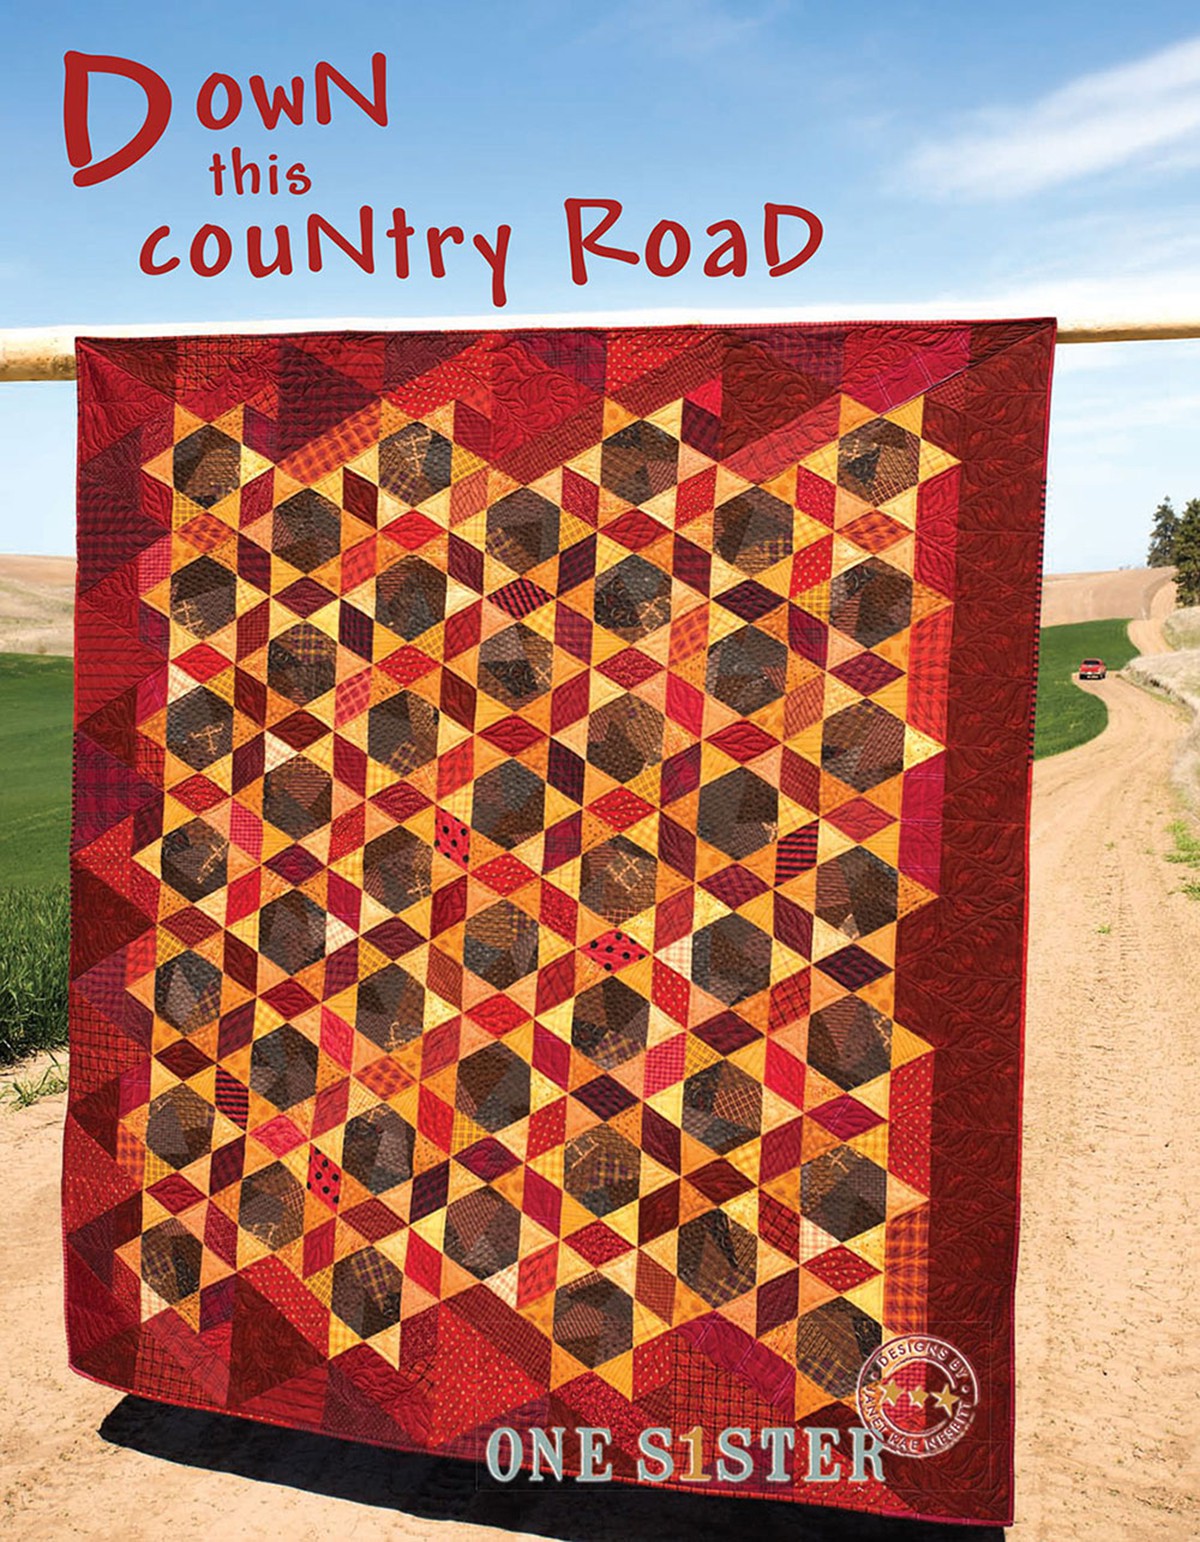 Down This Country Road Quilt Pattern Book by Janet Nesbitt of One Sister Designs